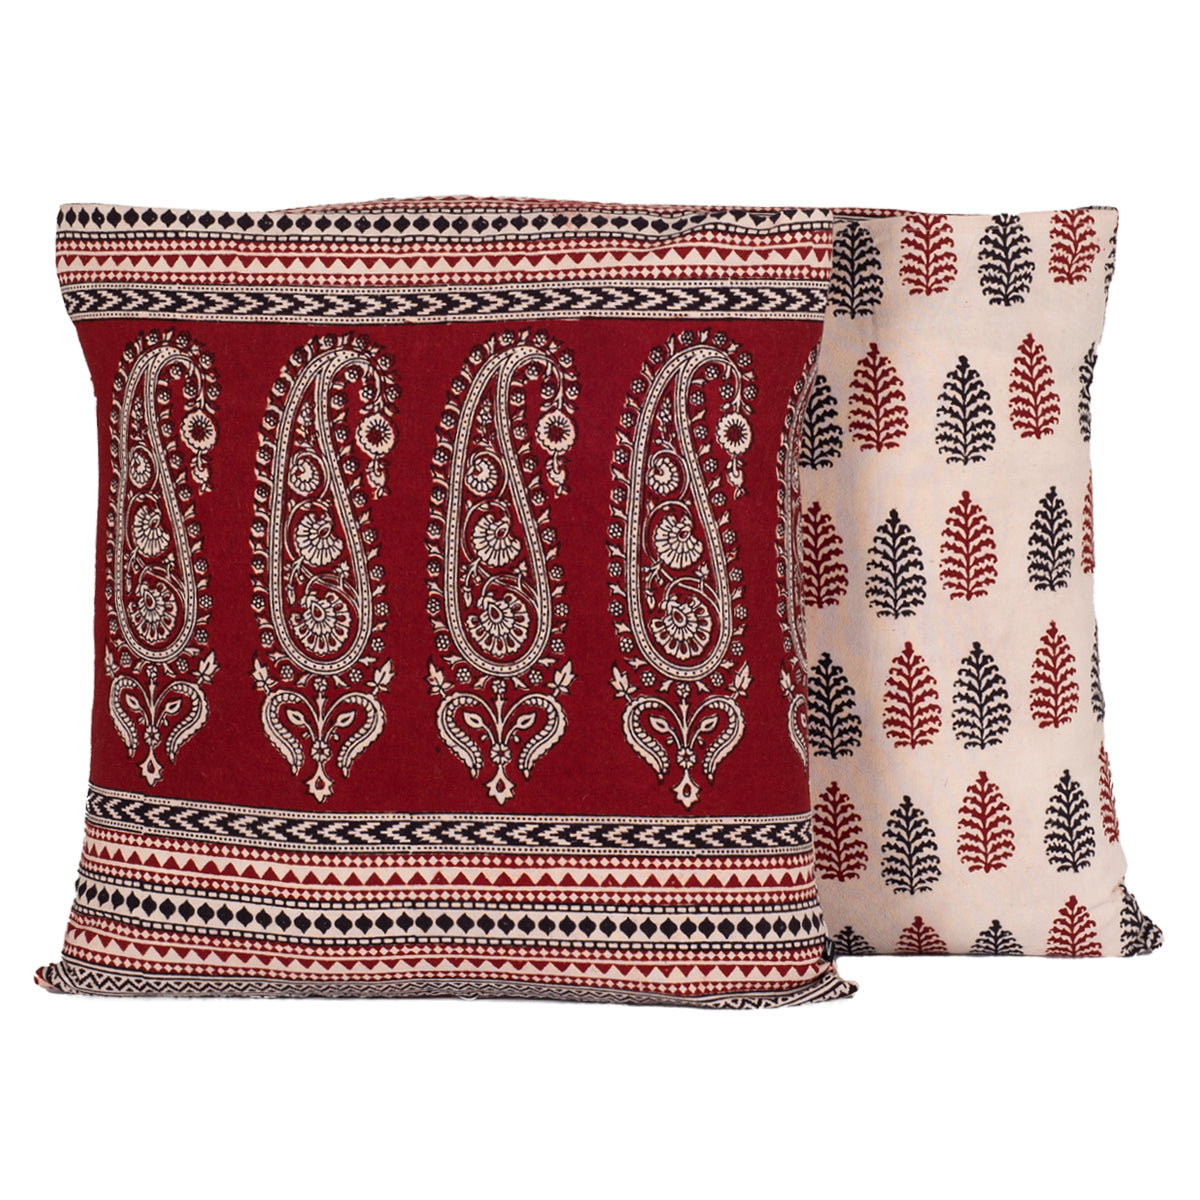 Paisley and Pine Bagh Hand Block Print Cotton Cushion Cover - Red Black-2